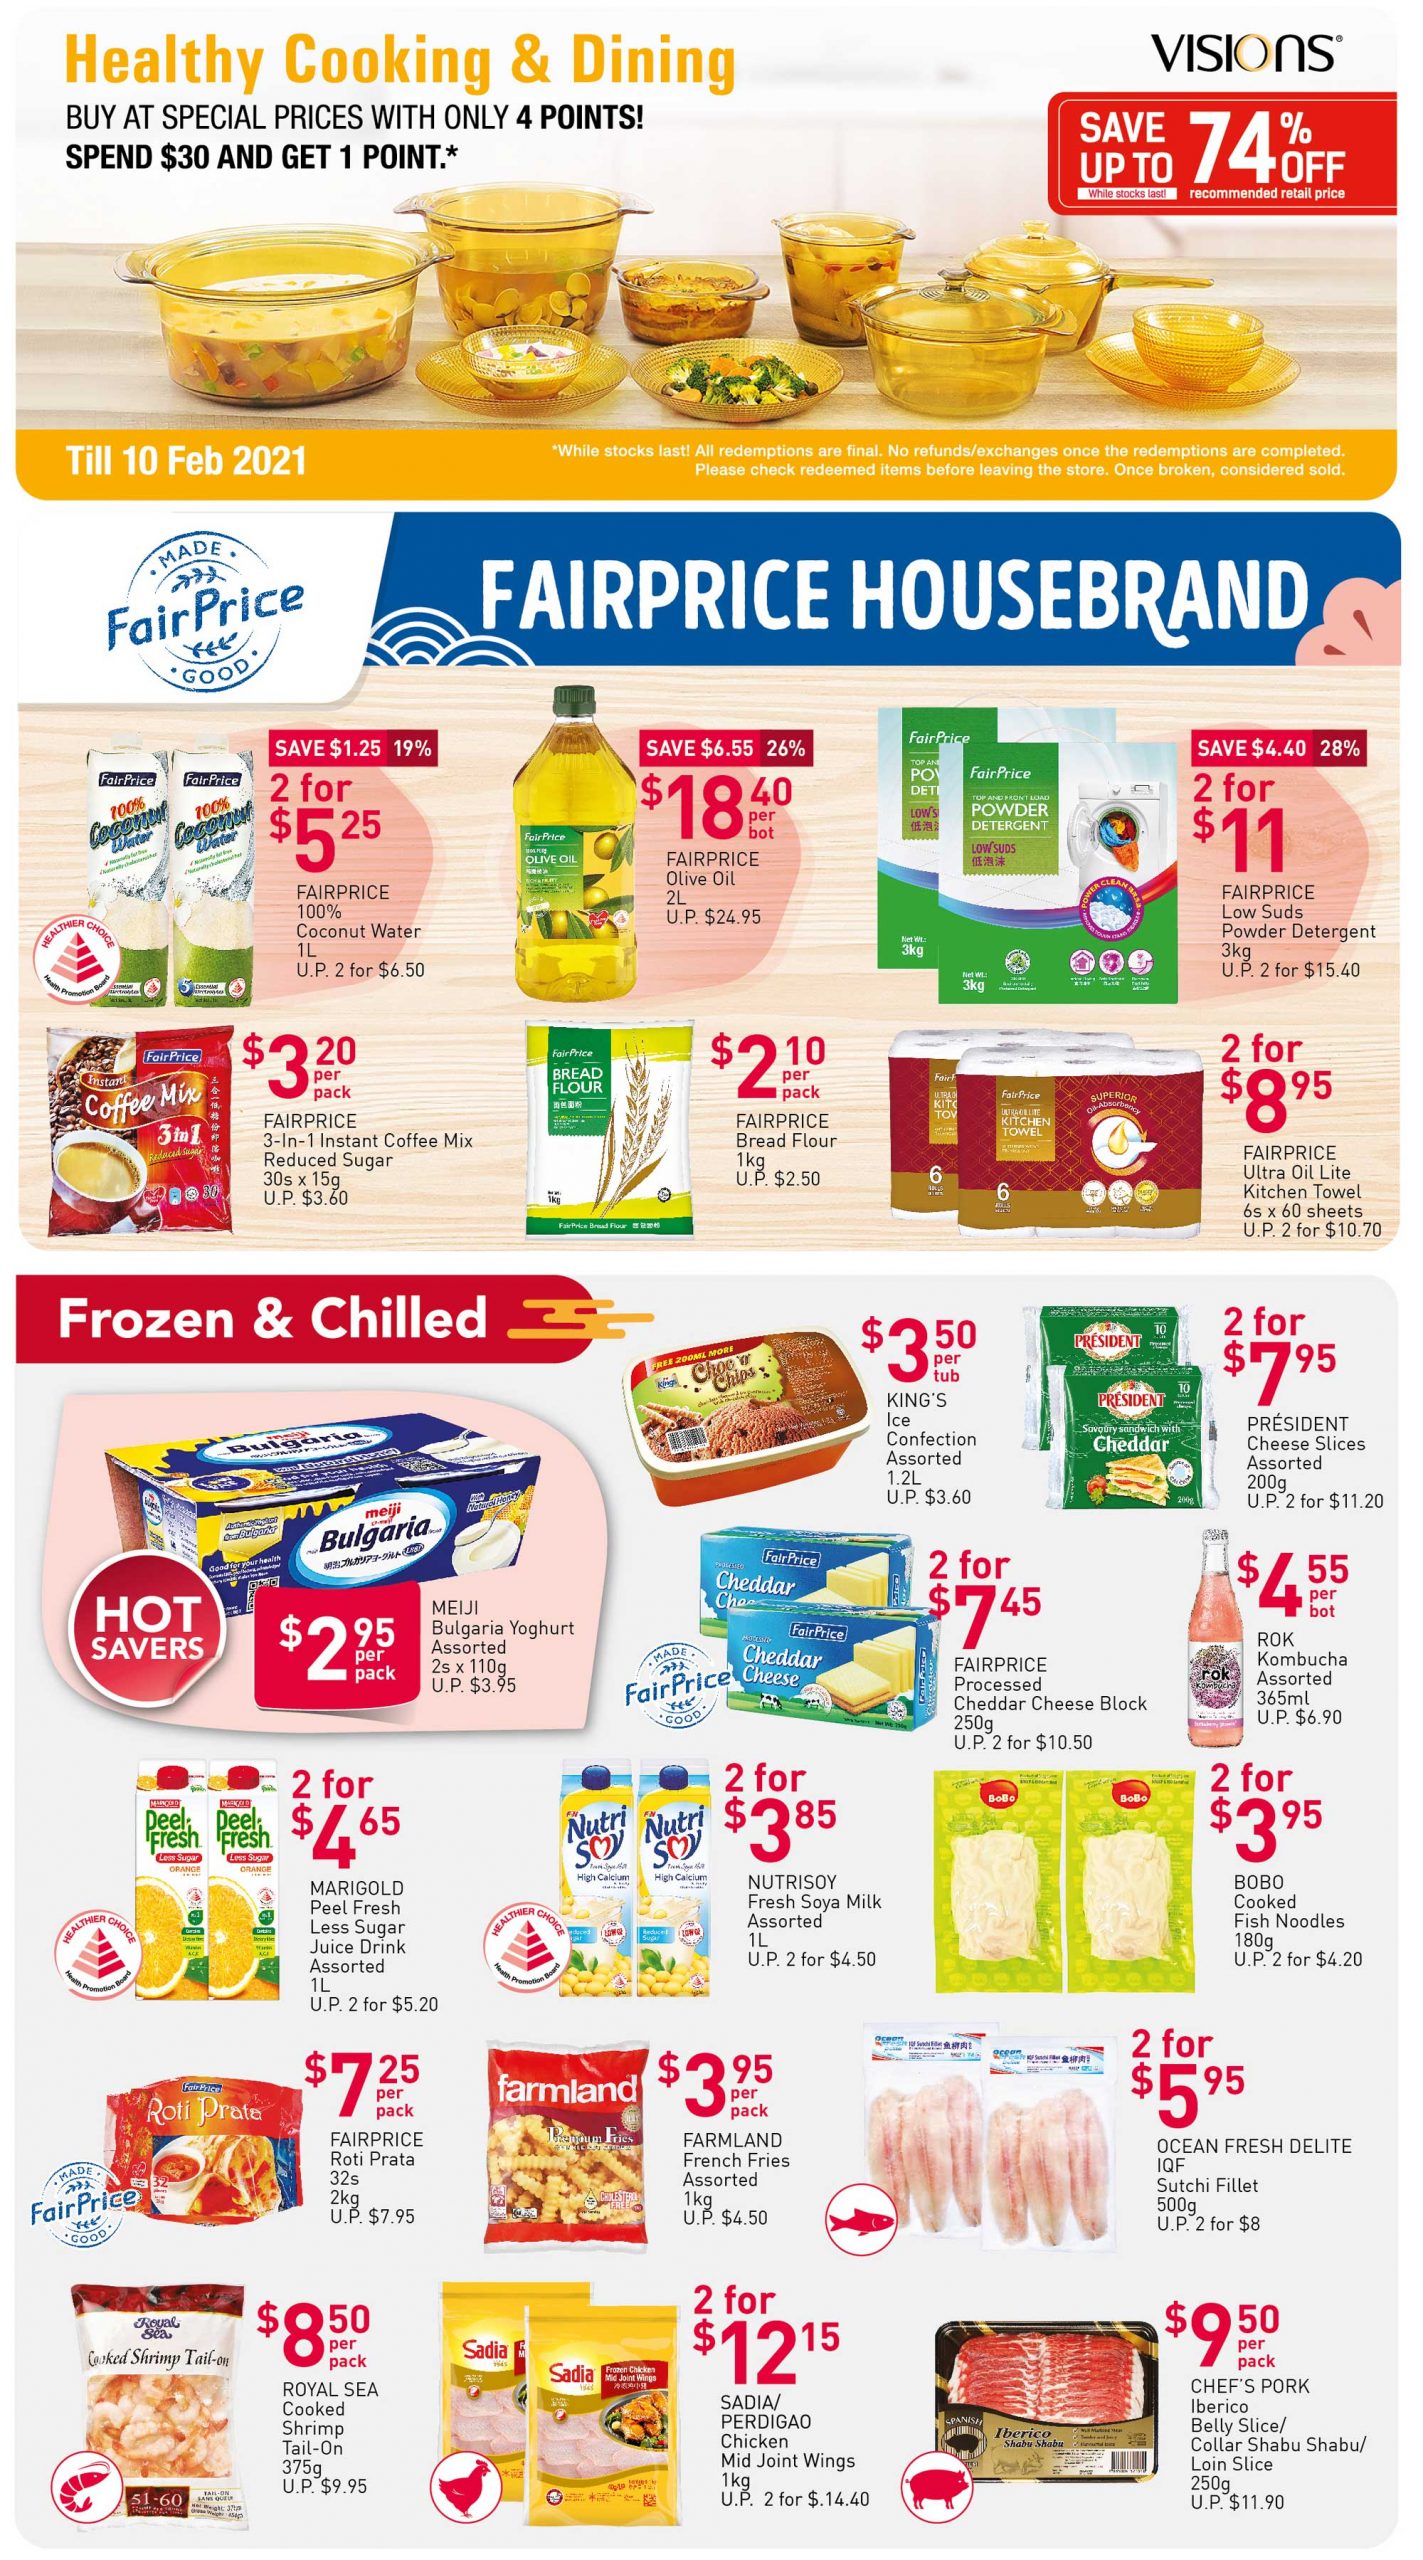 FairPrice’s weekly saver deals till 13 January 2021